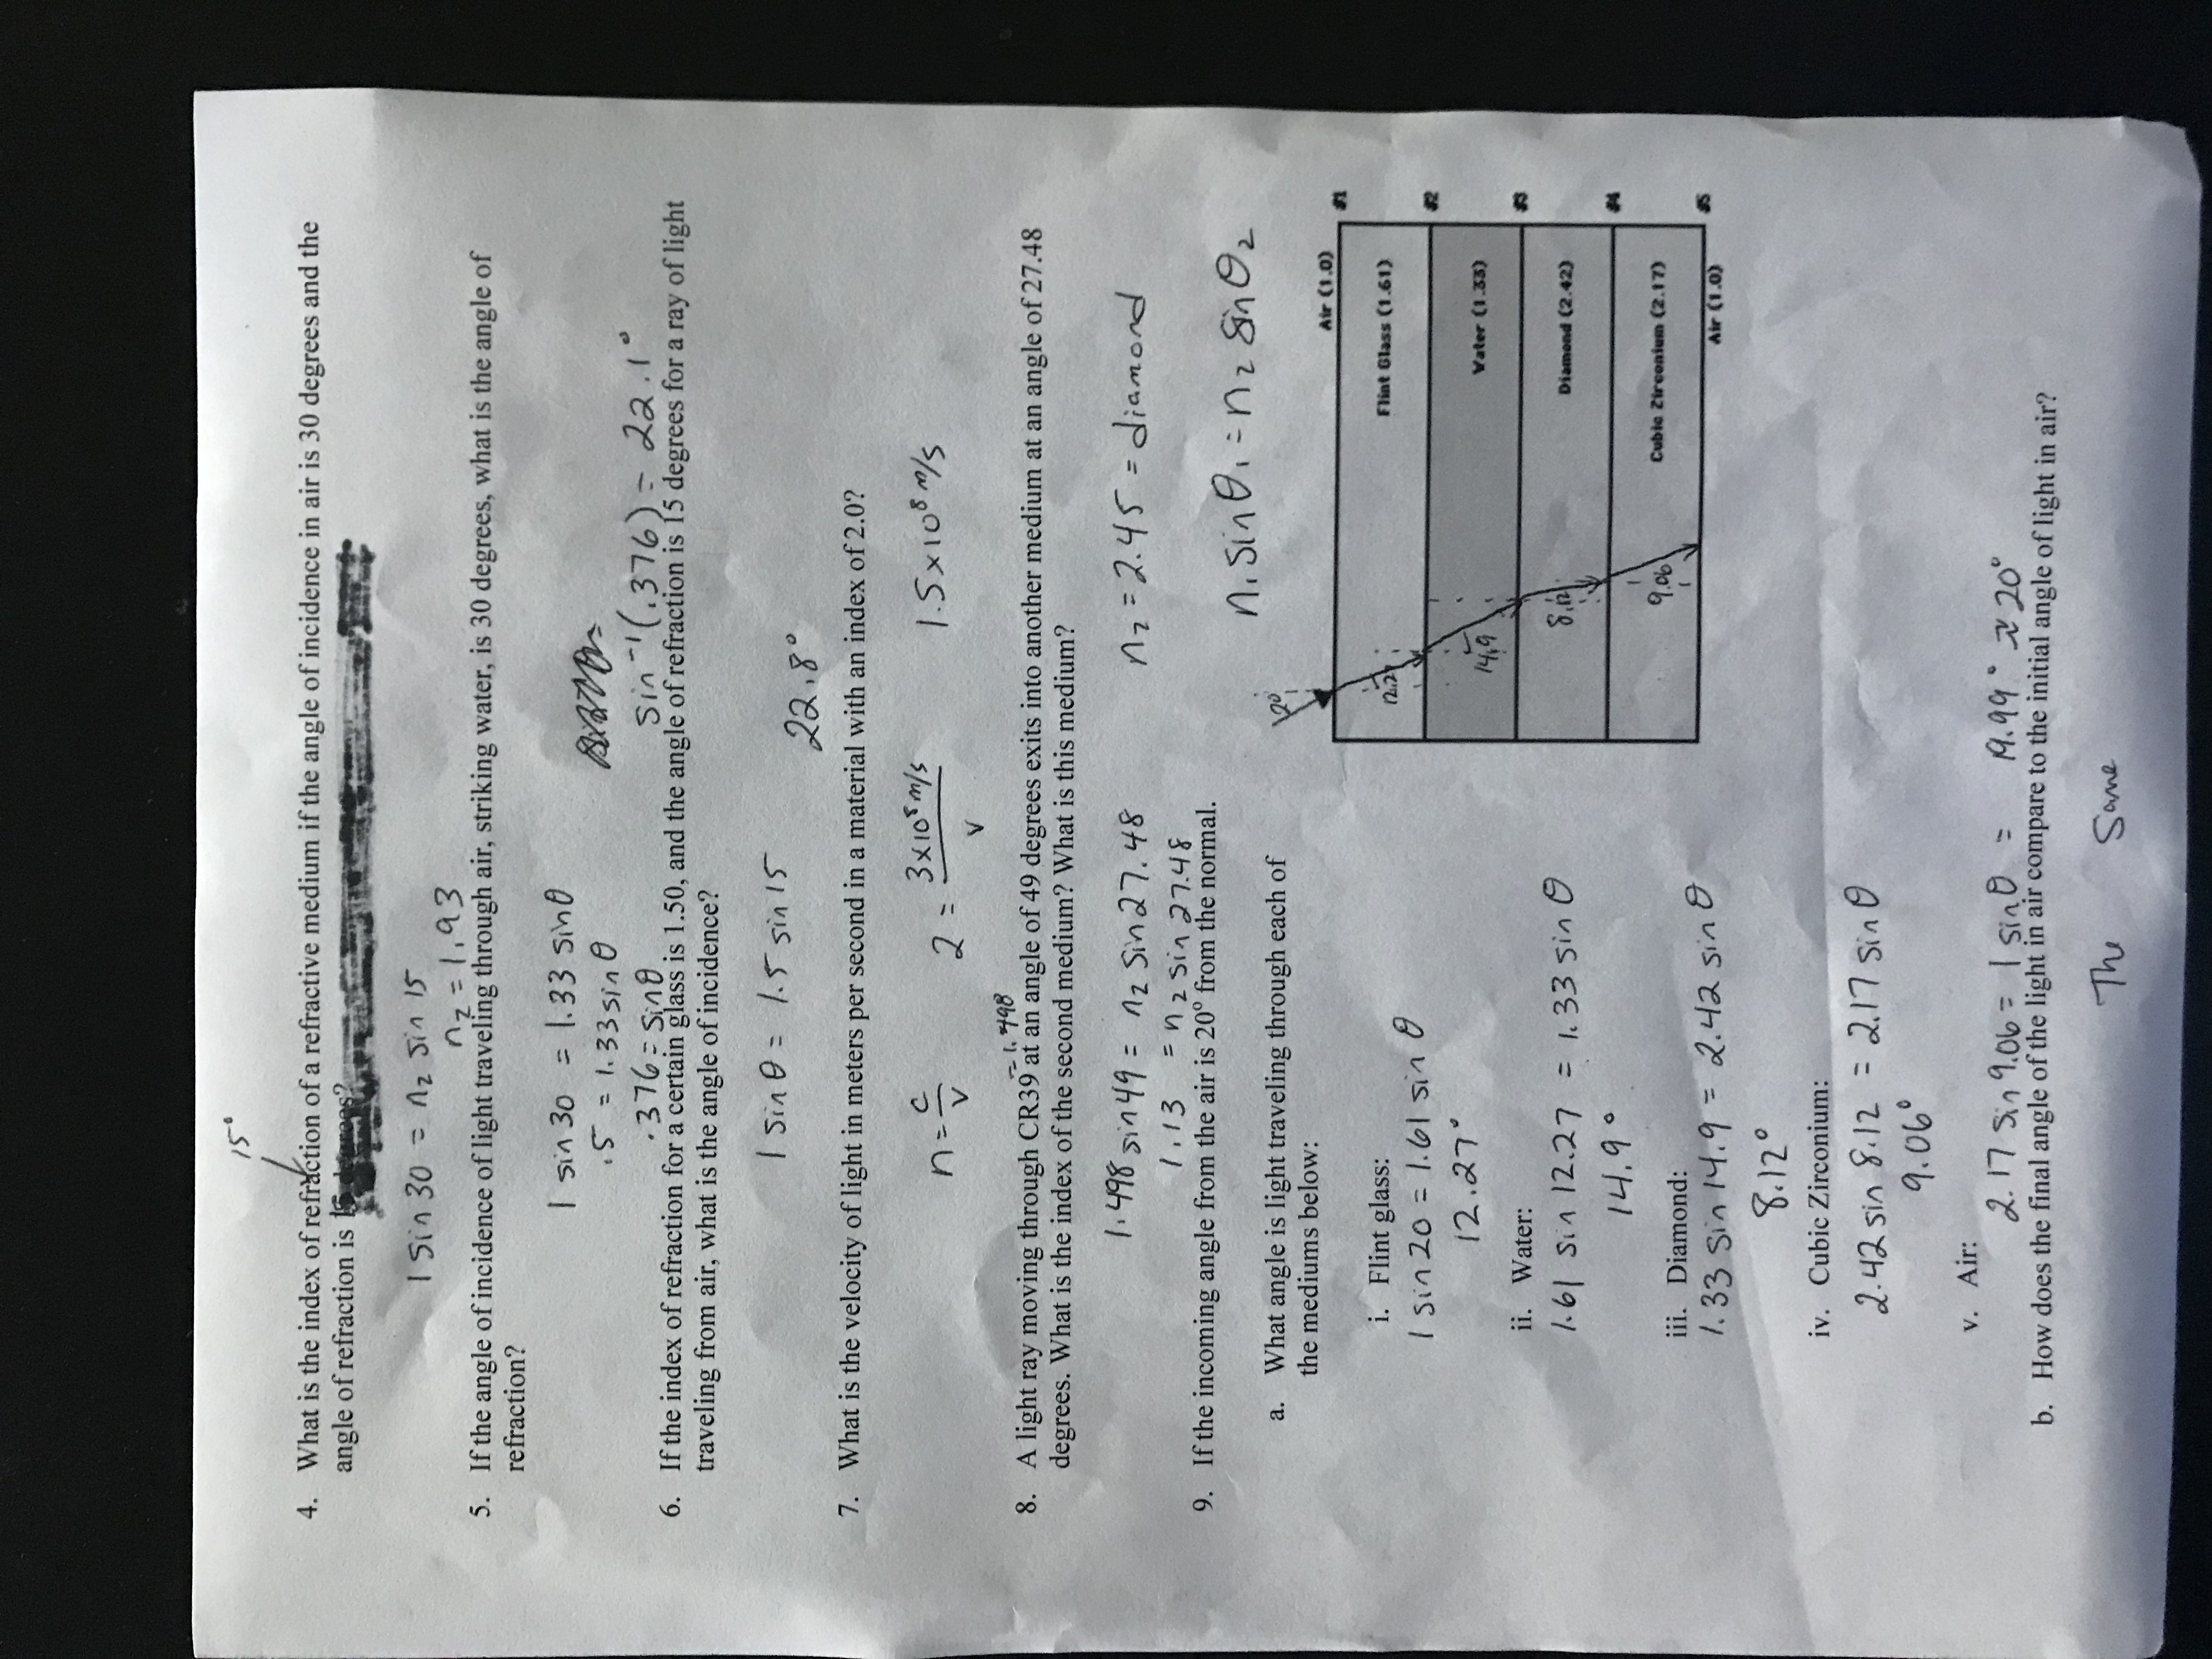 Waves - Physics With Regard To Waves Review Worksheet Answer Key